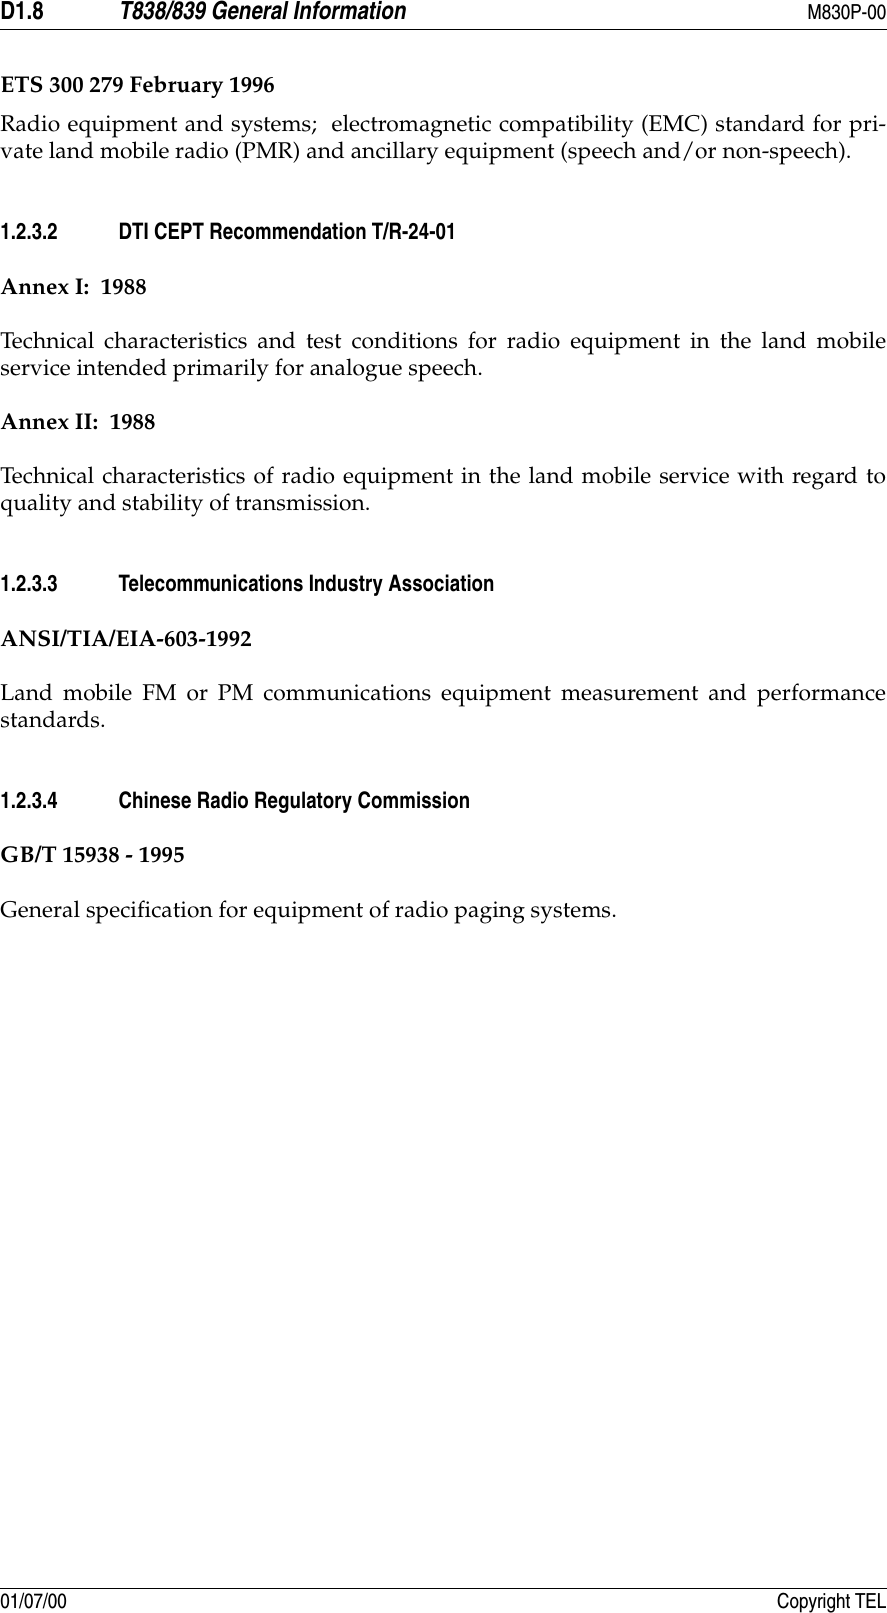 D1.8 T838/839 General Information M830P-0001/07/00 Copyright TELETS 300 279 February 1996Radio equipment and systems;  electromagnetic compatibility (EMC) standard for pri-vate land mobile radio (PMR) and ancillary equipment (speech and/or non-speech).1.2.3.2 DTI CEPT Recommendation T/R-24-01Annex I:  1988Technical characteristics and test conditions for radio equipment in the land mobileservice intended primarily for analogue speech.Annex II:  1988Technical characteristics of radio equipment in the land mobile service with regard toquality and stability of transmission.1.2.3.3 Telecommunications Industry AssociationANSI/TIA/EIA-603-1992Land mobile FM or PM communications equipment measurement and performancestandards.1.2.3.4 Chinese Radio Regulatory CommissionGB/T 15938 - 1995General specification for equipment of radio paging systems.